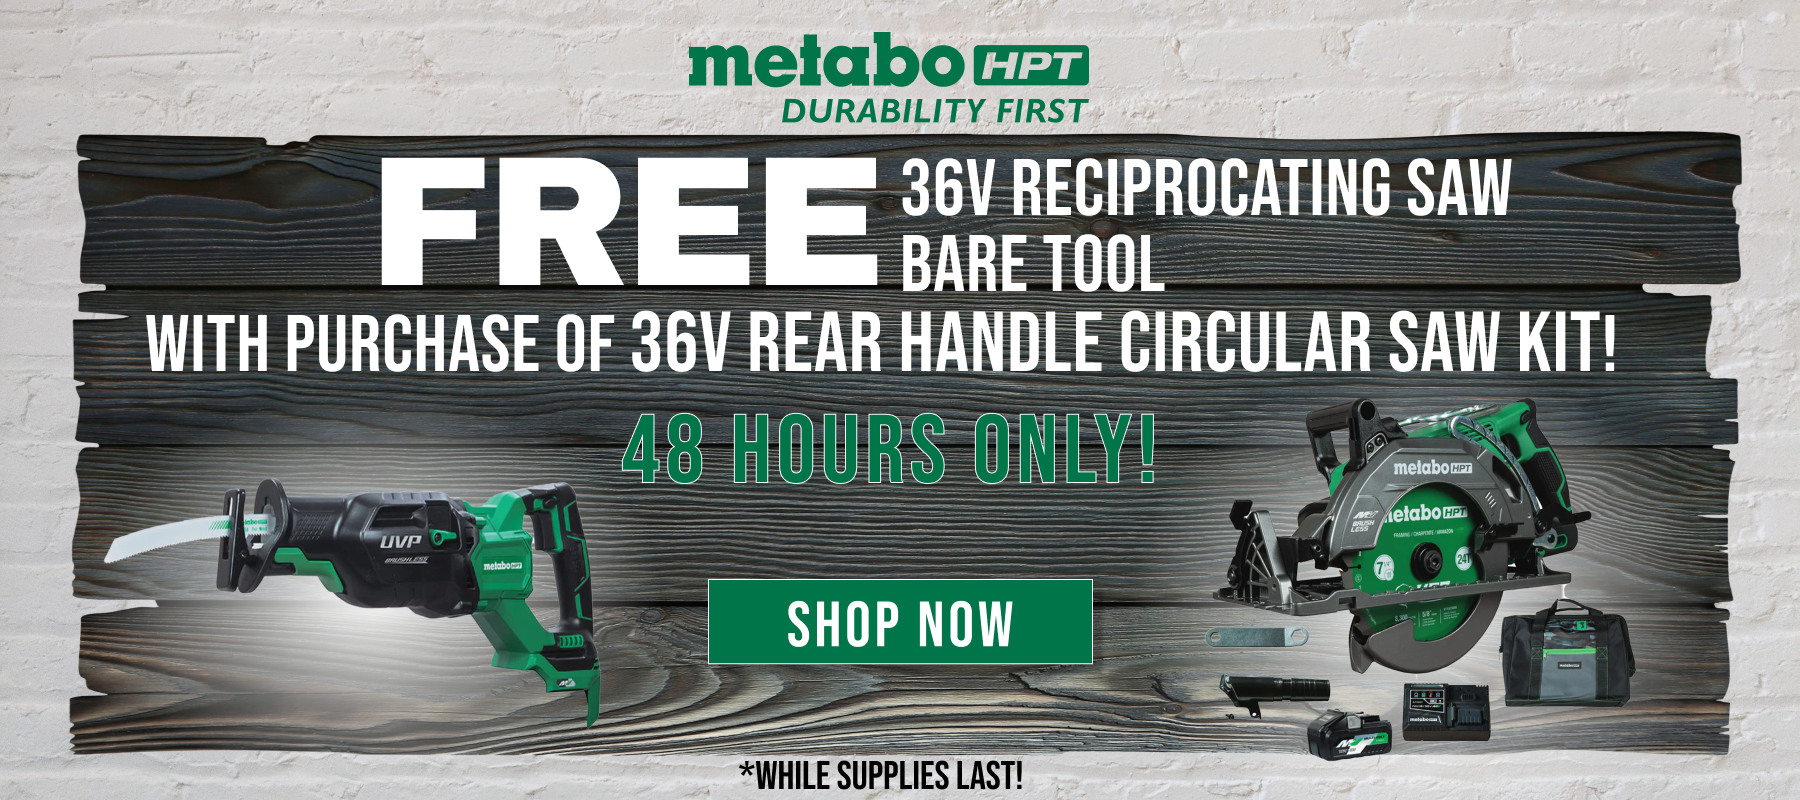 Metabo HPT // FREE 36V Reciprocating Saw Bare Tool With Purchase of 36V Rear Handle Circular Saw Kit! // 48 Hours Only! // While Supplies Last! // SHOP NOW